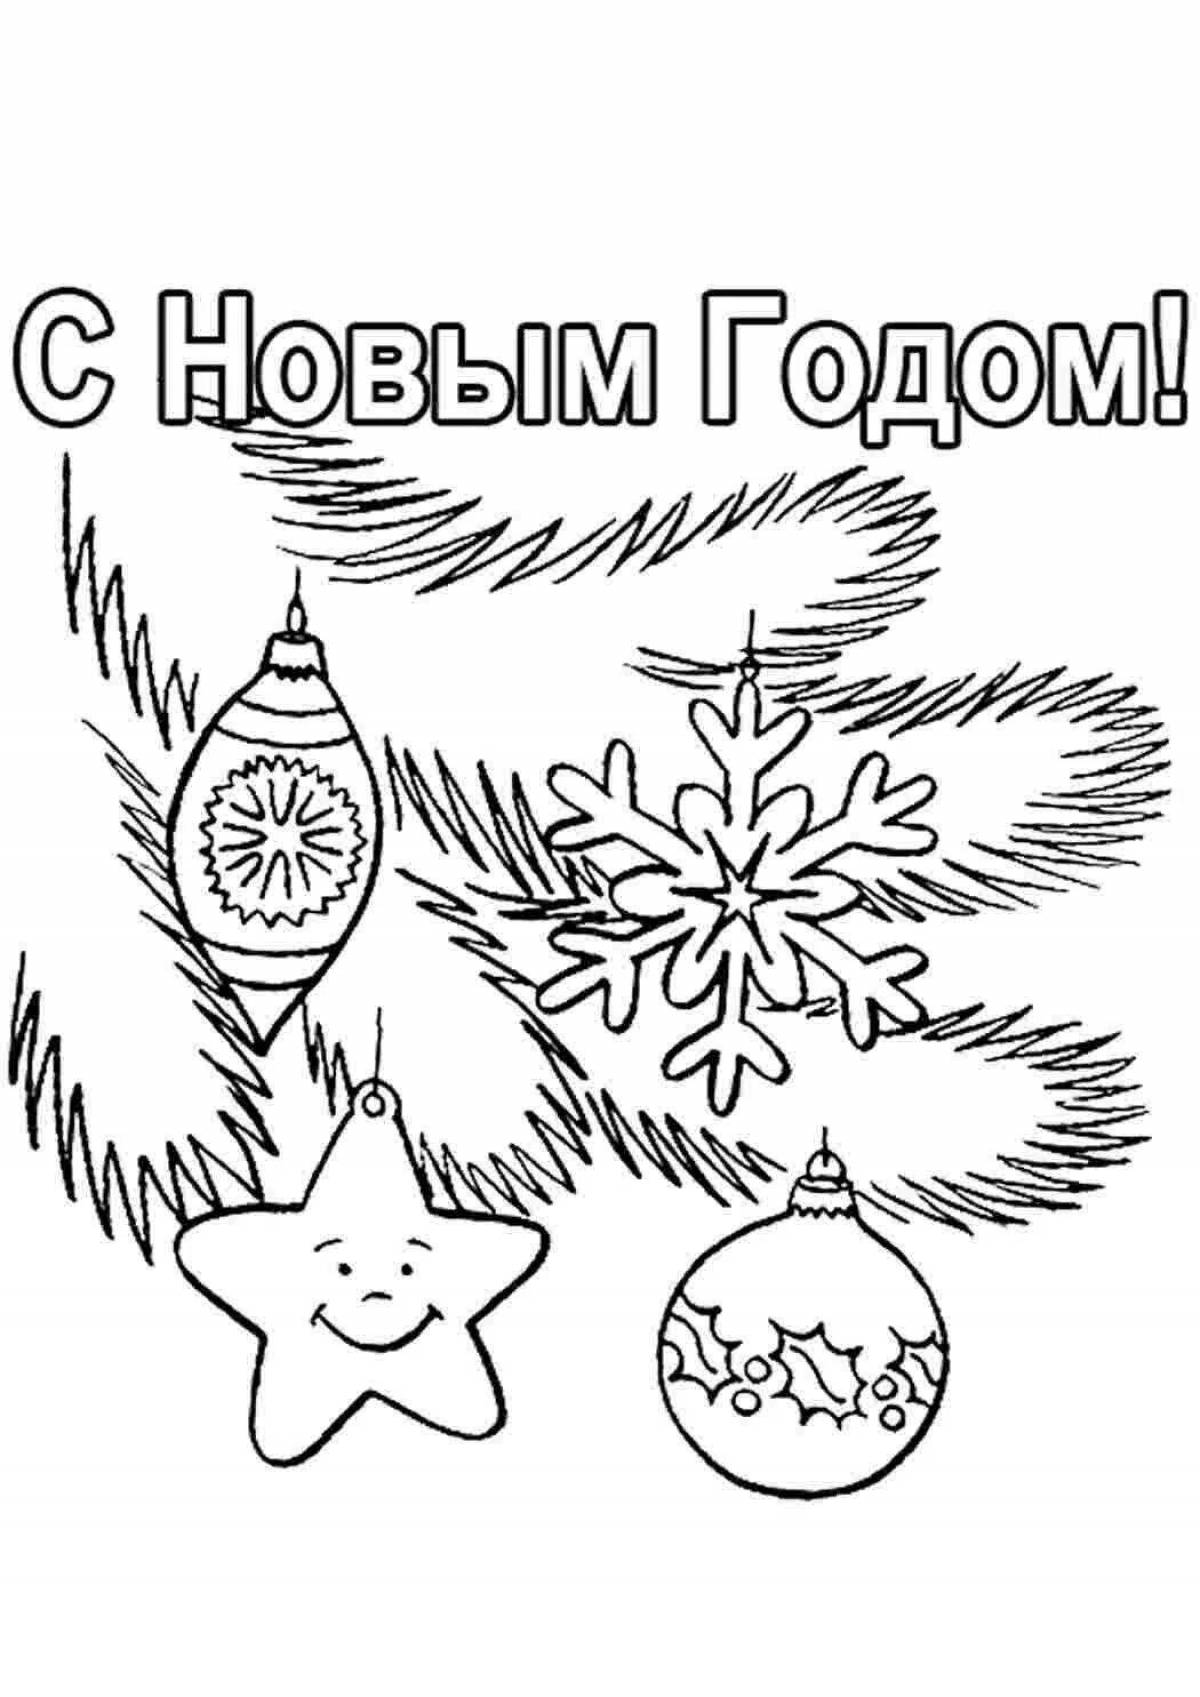 Adorable Christmas tree branch coloring book